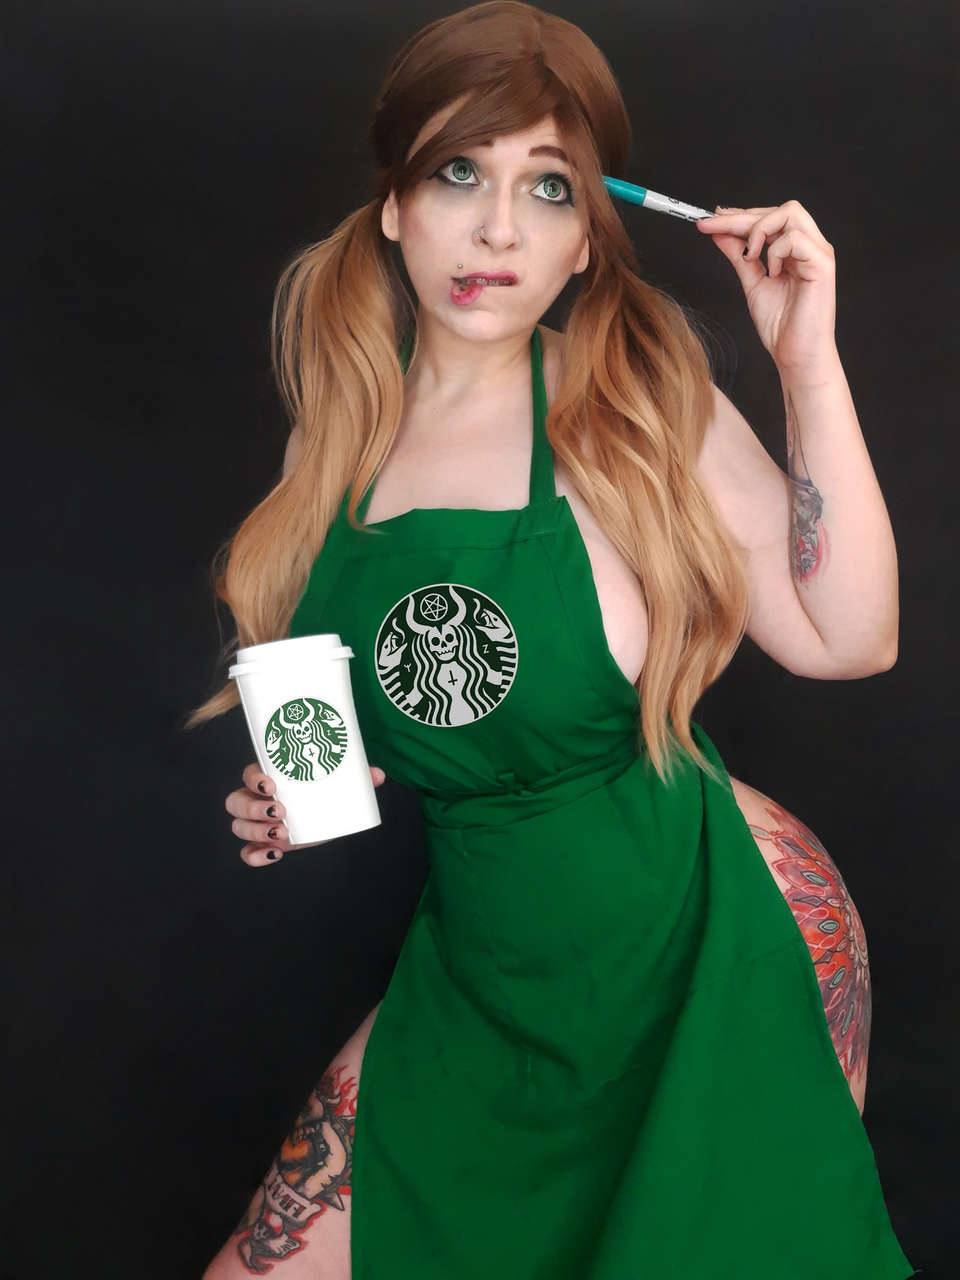 The Devil Coffee Iced Latte Cosplay By Dairett